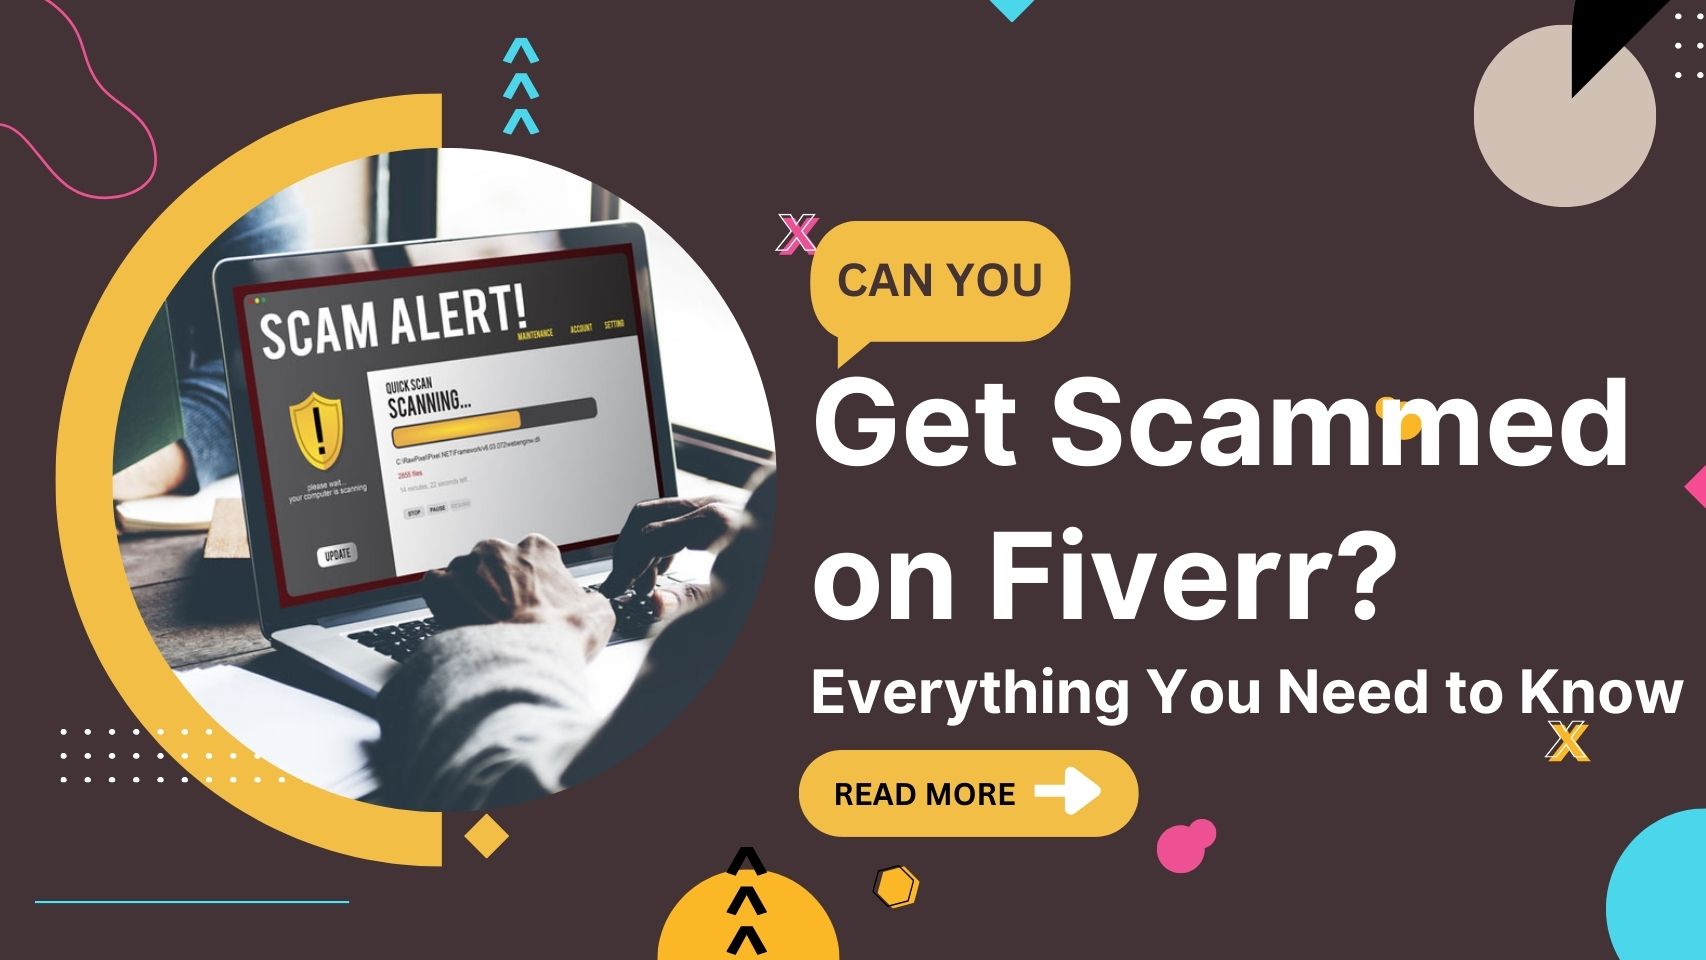 Can You Get Scammed on Fiverr? Everything You Need to Know